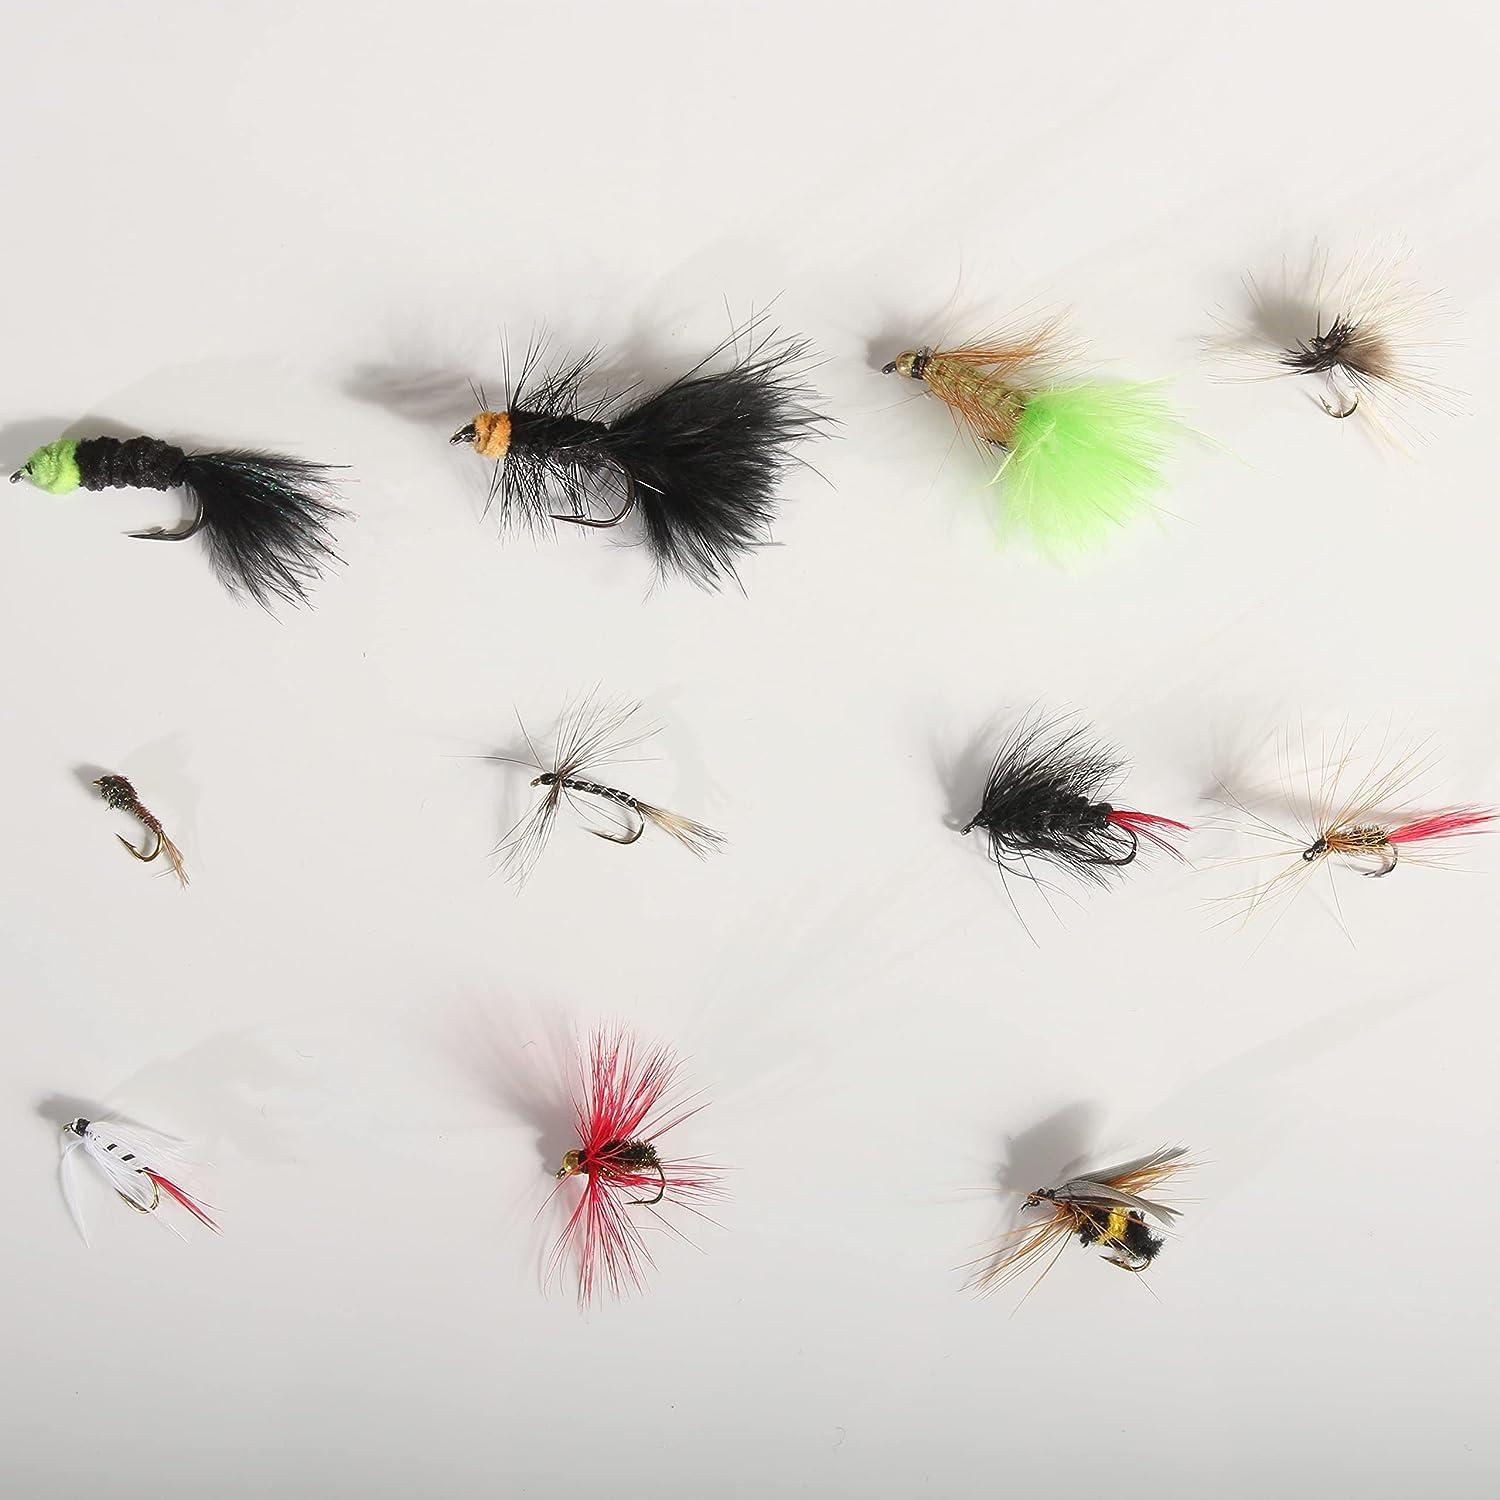 Bimoo 64pcs/Box Assorted Trout Fly Fishing Flies Kit Nymph Dry Flies  Insects Brown Brook Trout Grayling Fishing Fly Lures Bait - AliExpress